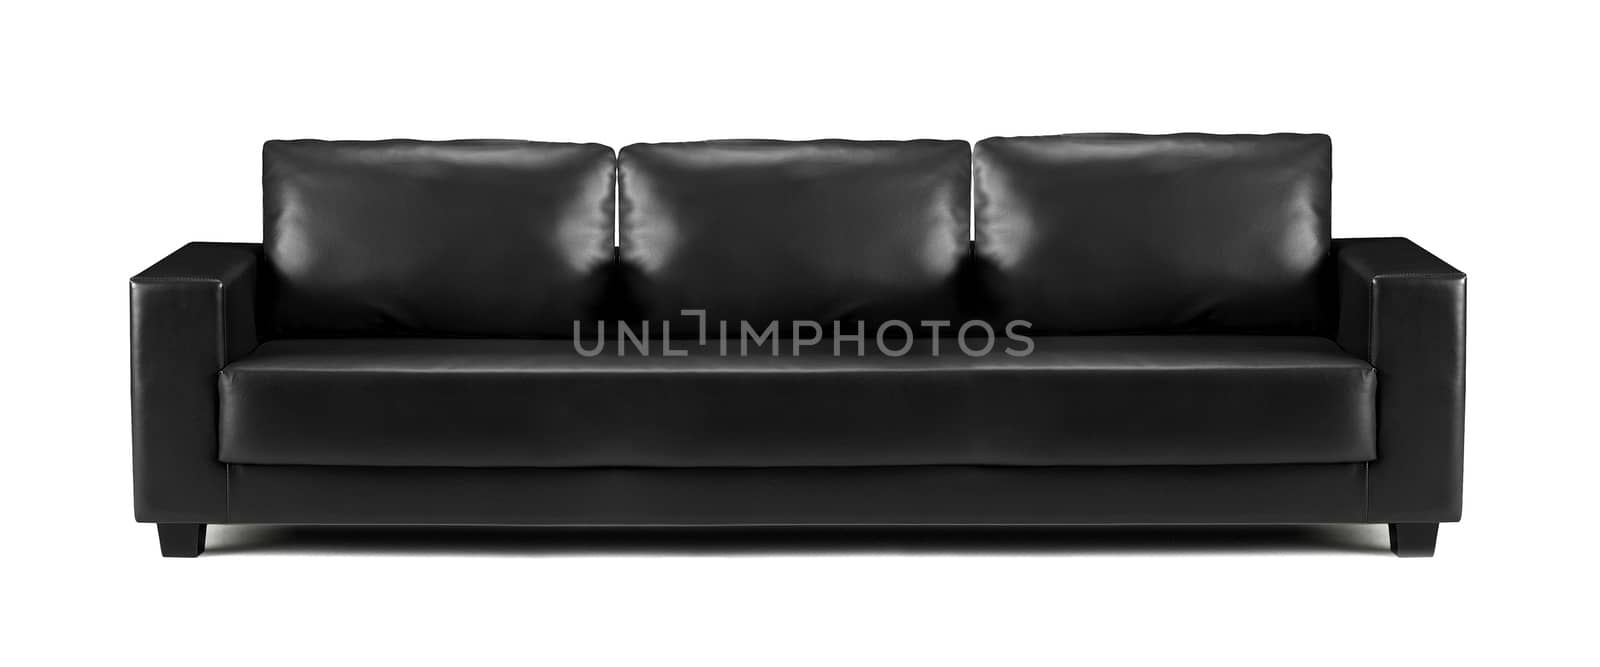 modern black leather sofa isolated by ozaiachin